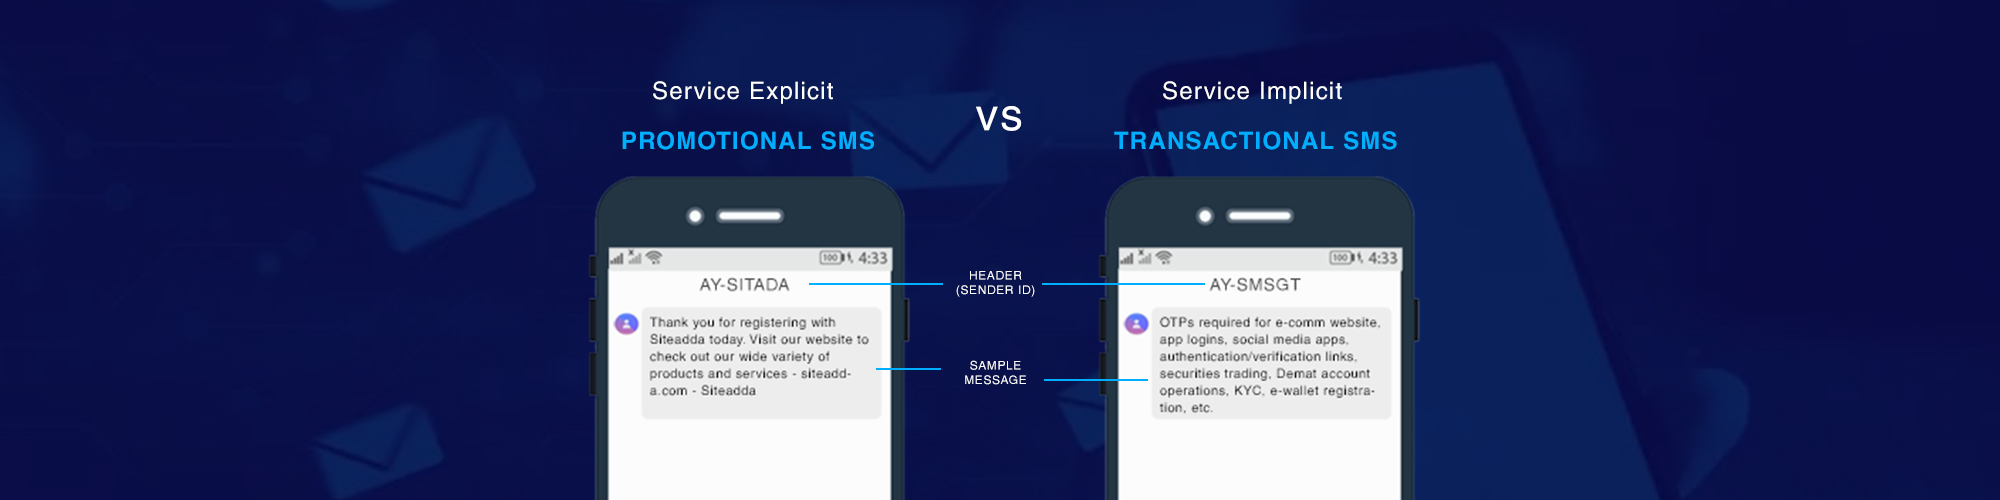 Differences Between Service Explicit and Service Implicit